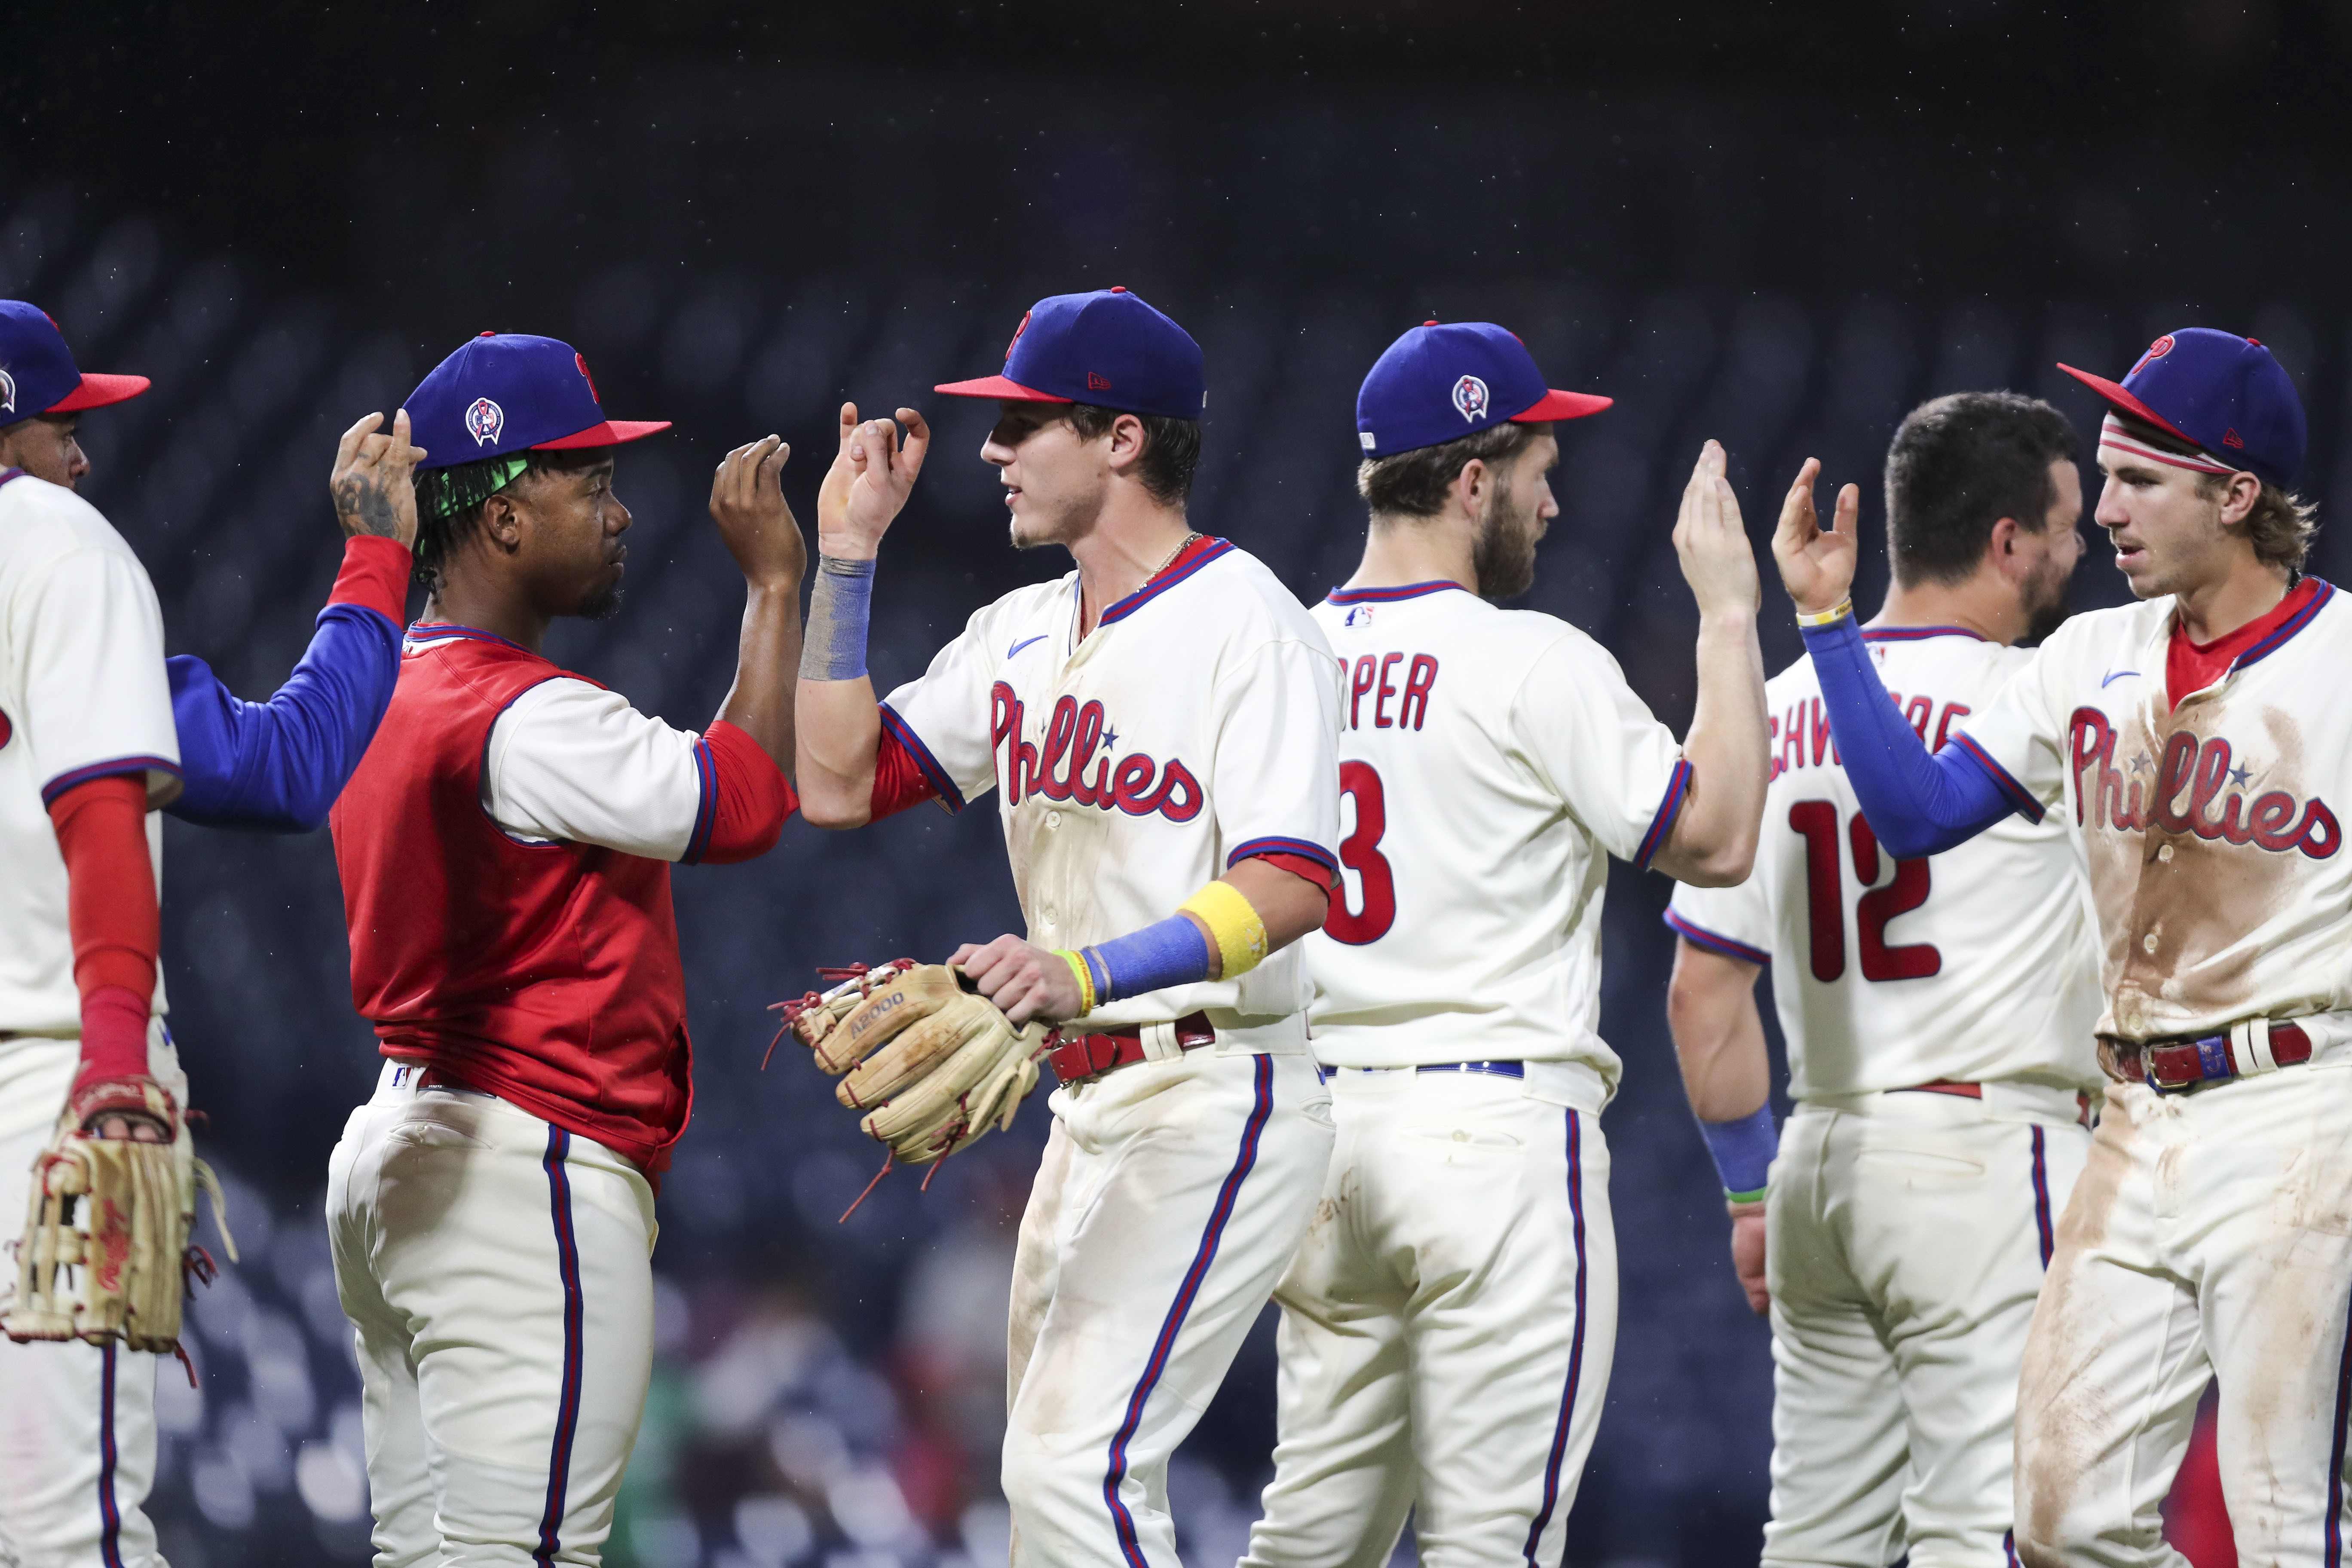 Phillies hope to bounce back after being 'punched in the face' in Game 2 –  NBC Sports Philadelphia